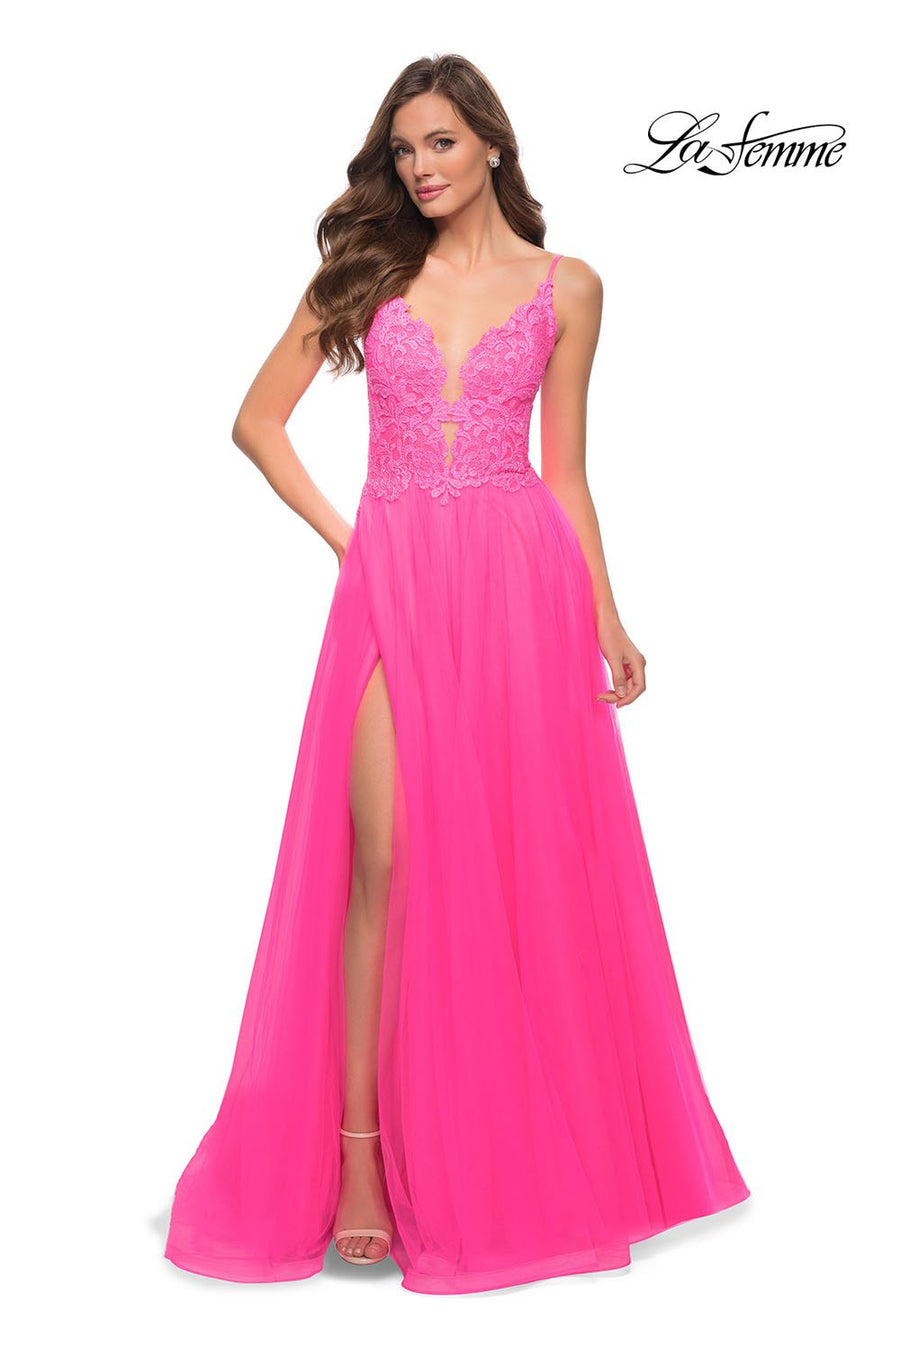 La Femme 29964 prom dress images.  La Femme 29964 is available in these colors: Neon Pink.